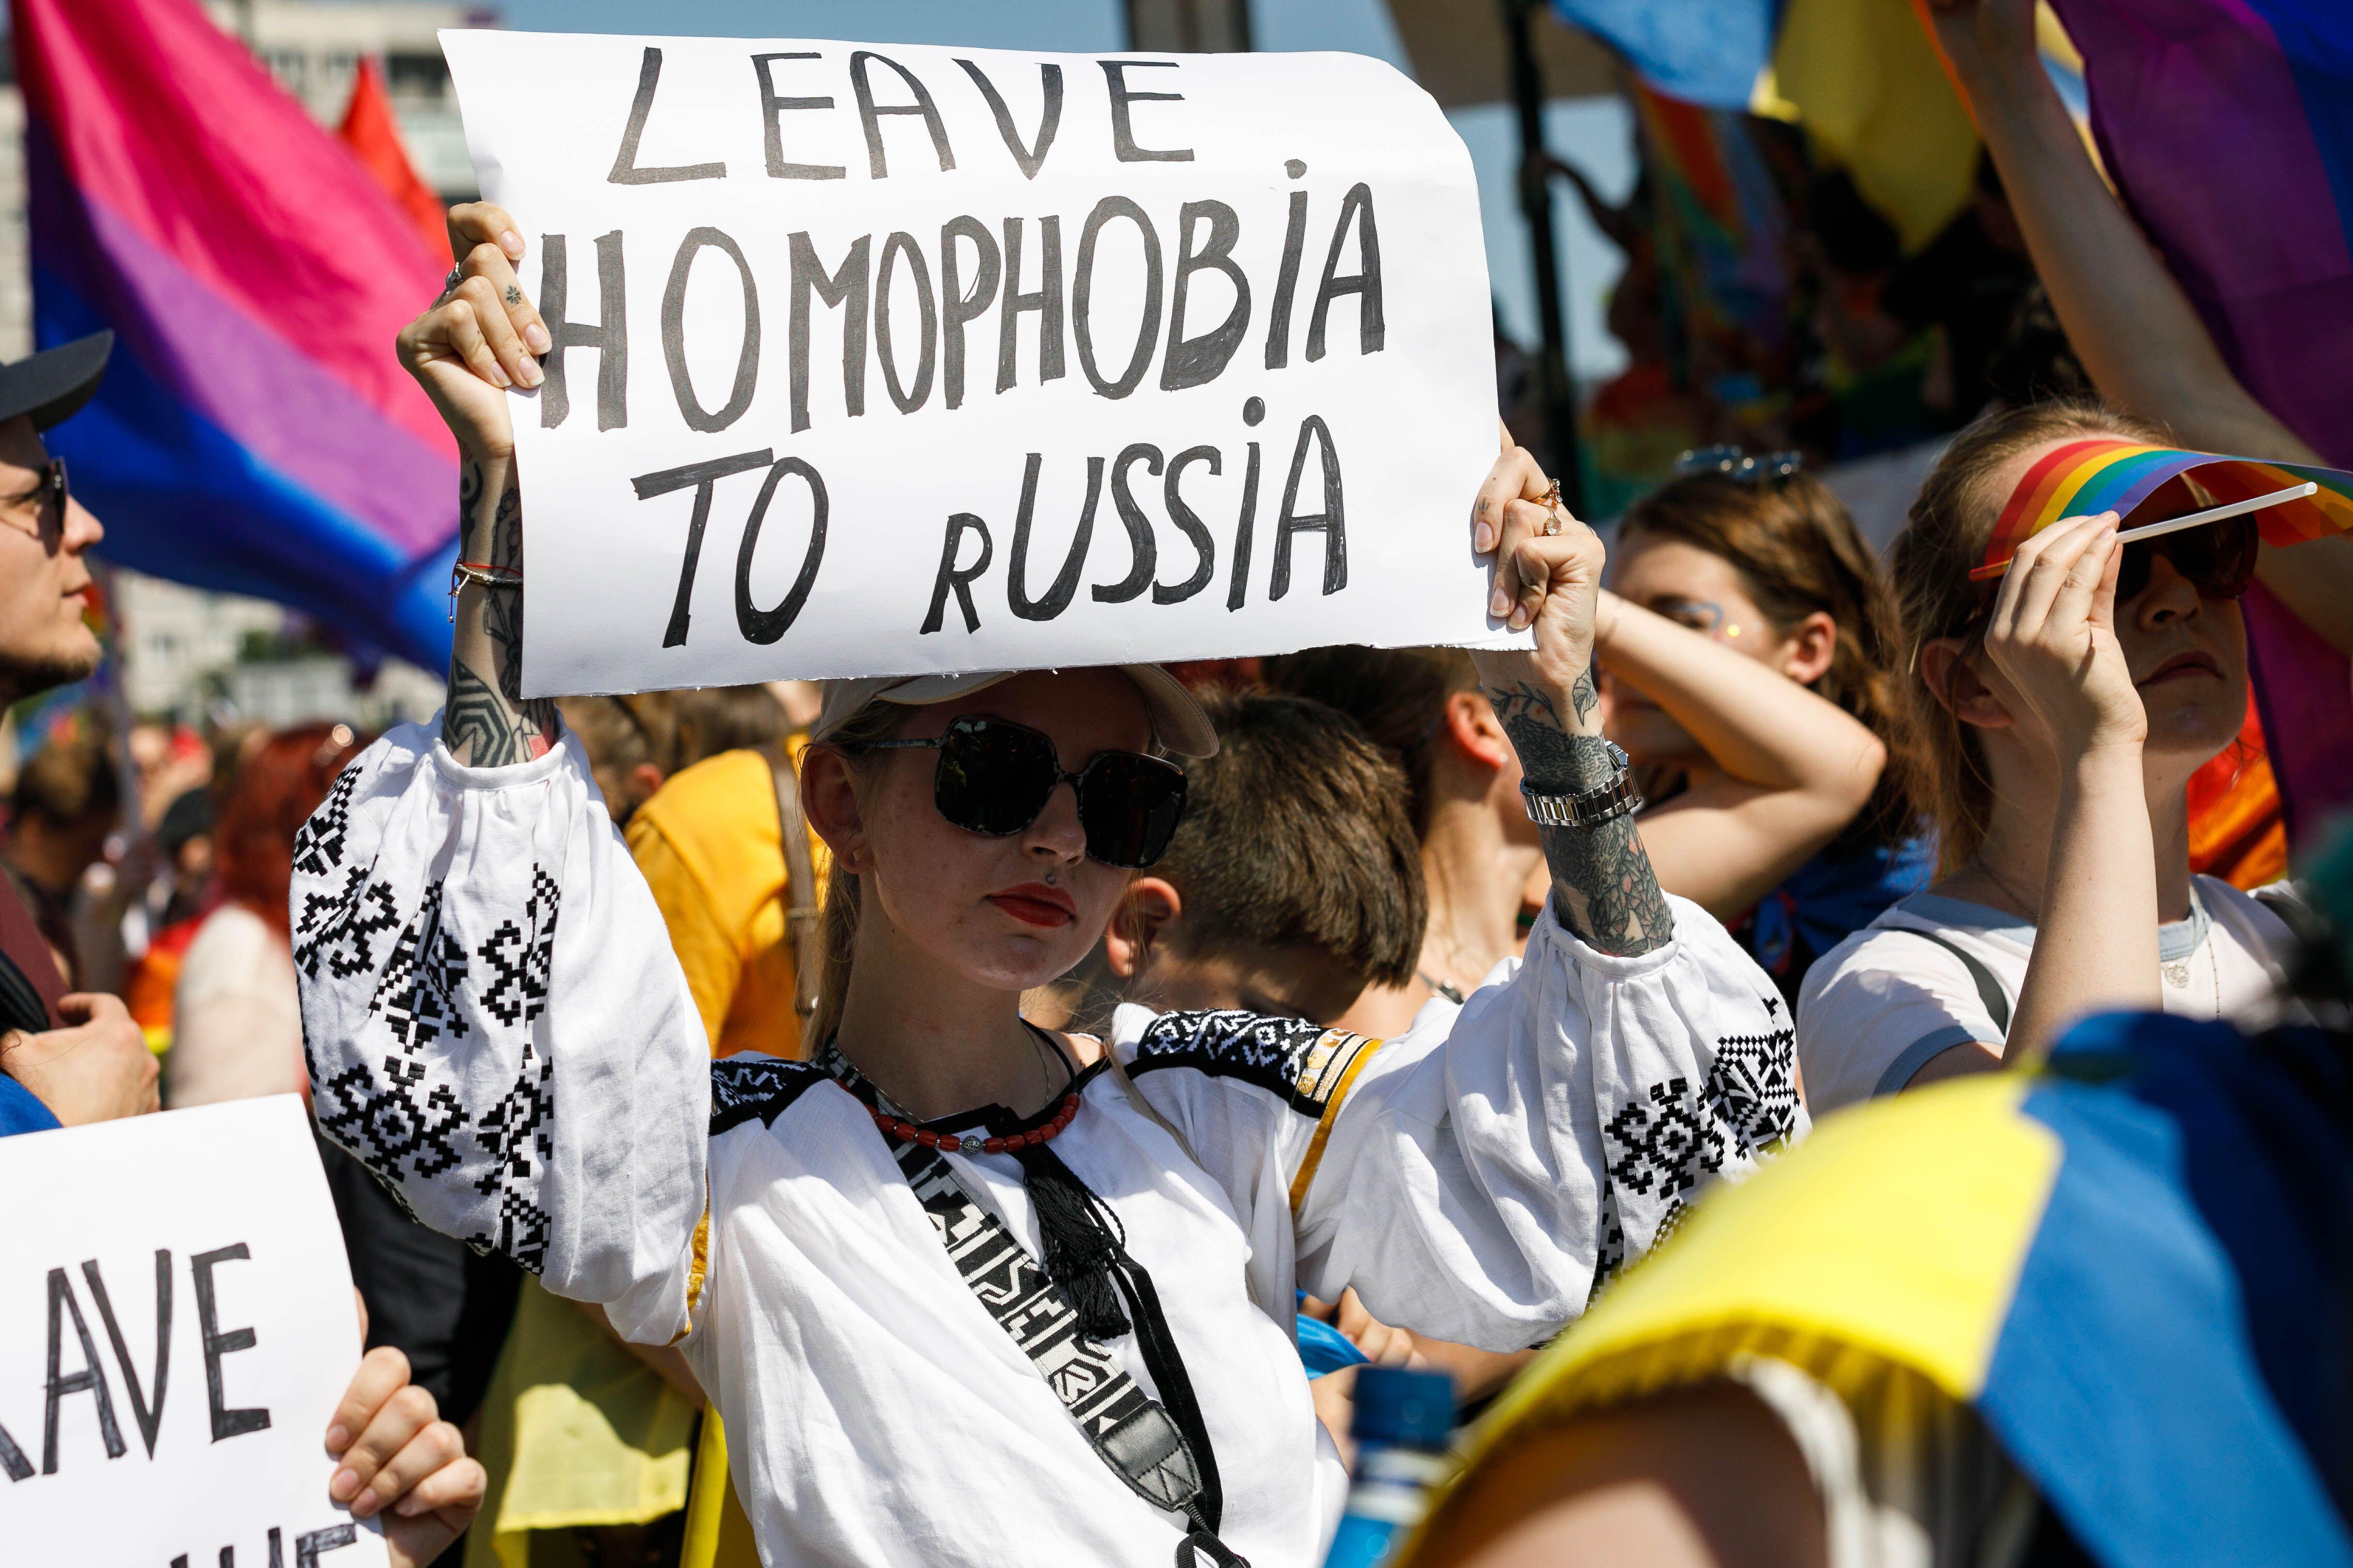 2 Boys Forced Russian Girl Sex Video - Ukraine war: Russian soldiers accused of anti-gay attacks | openDemocracy